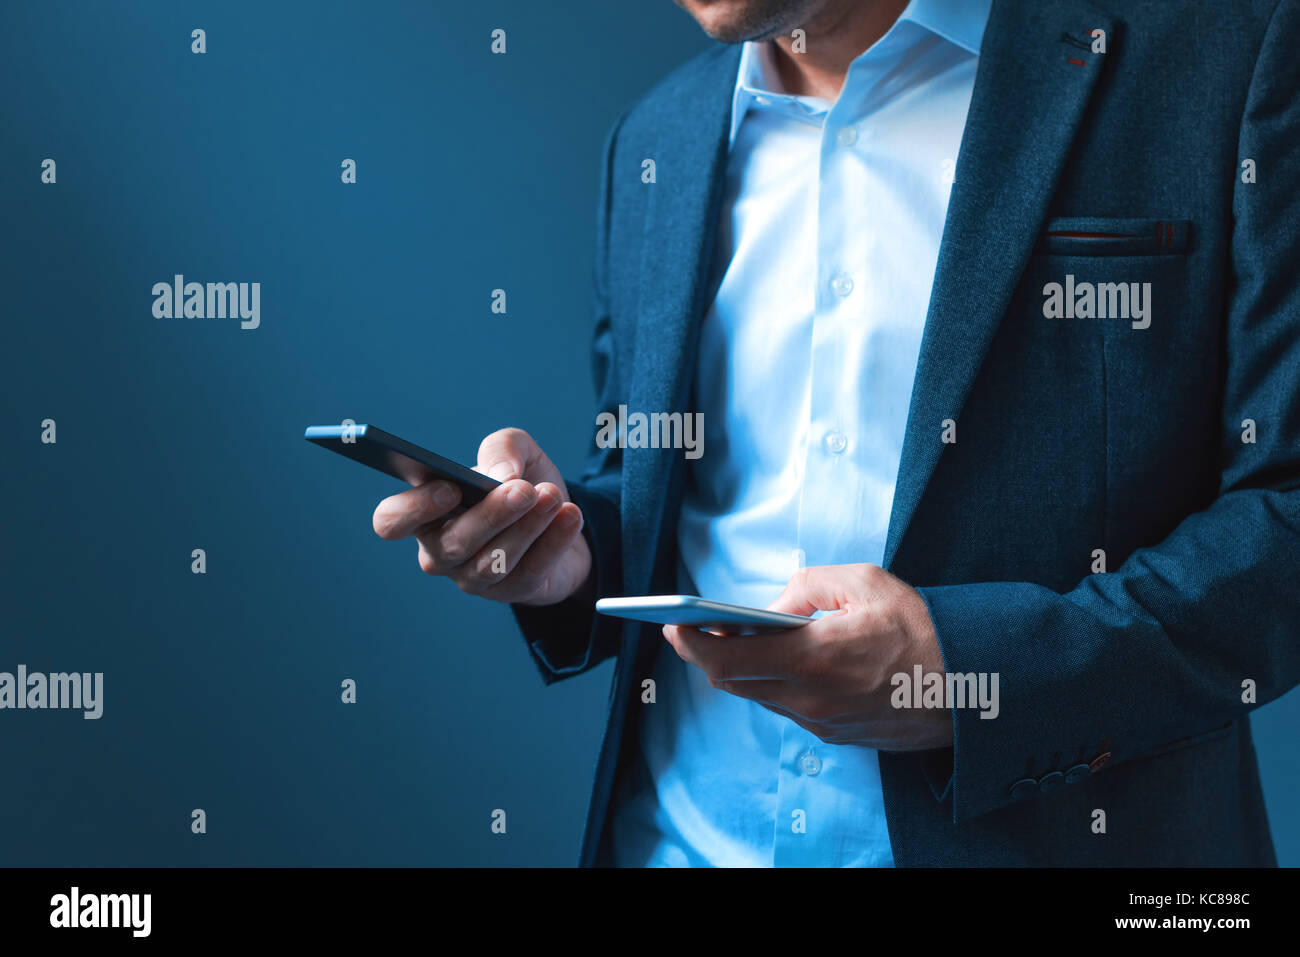 Sync and backup data on two mobile phones, man in business suit synchronizes files, messages and contact information on private and company smartphone Stock Photo